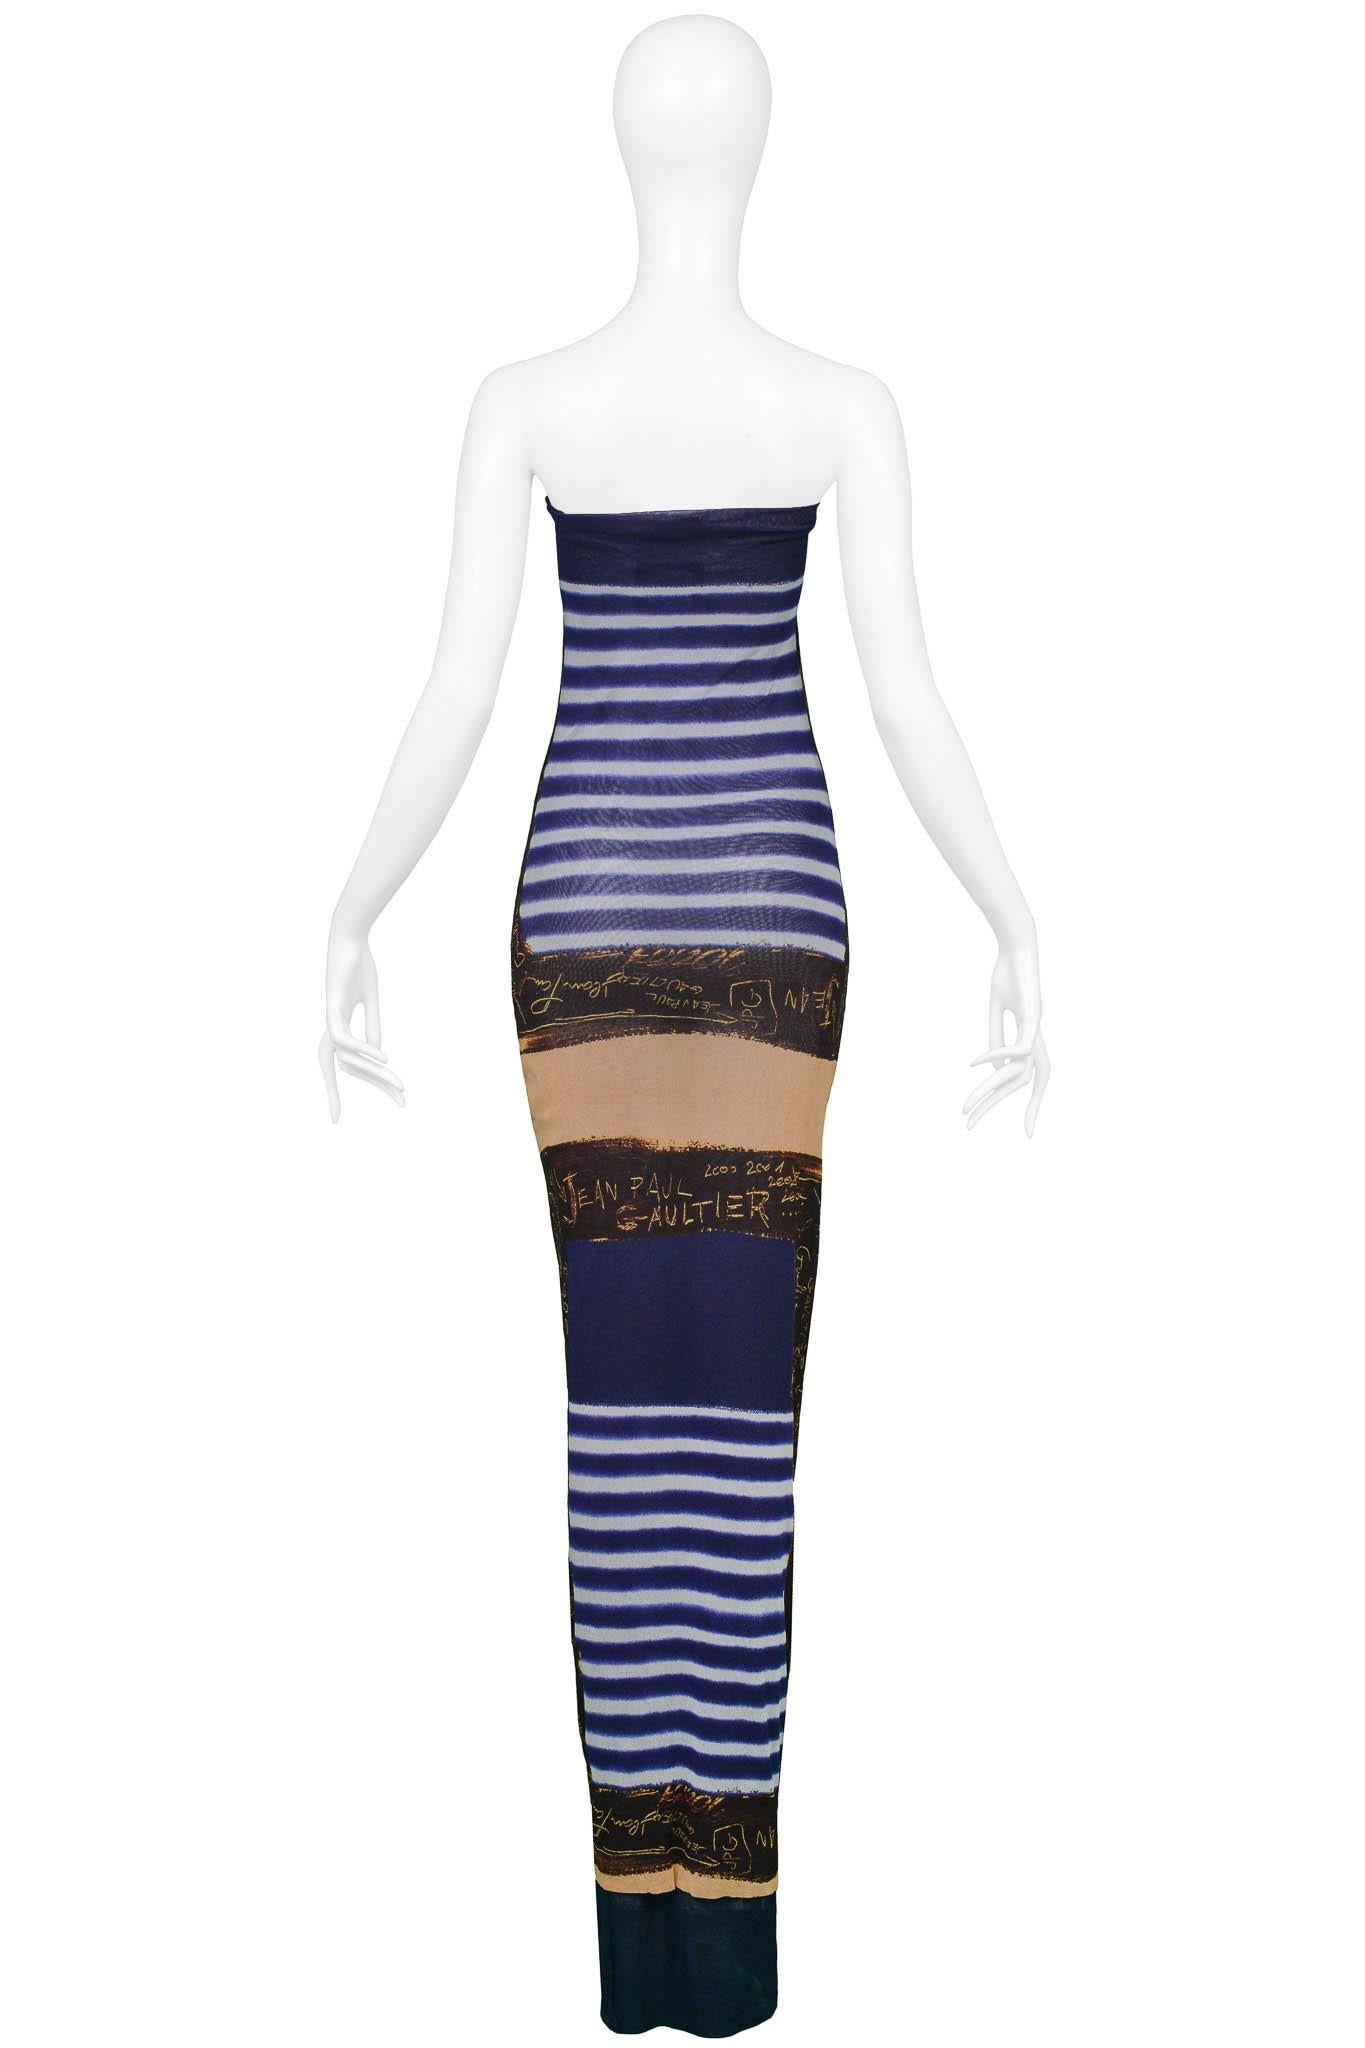 Jean Paul Gaultier French Nautical Striped Mesh Dress With Signature Print 2001 2